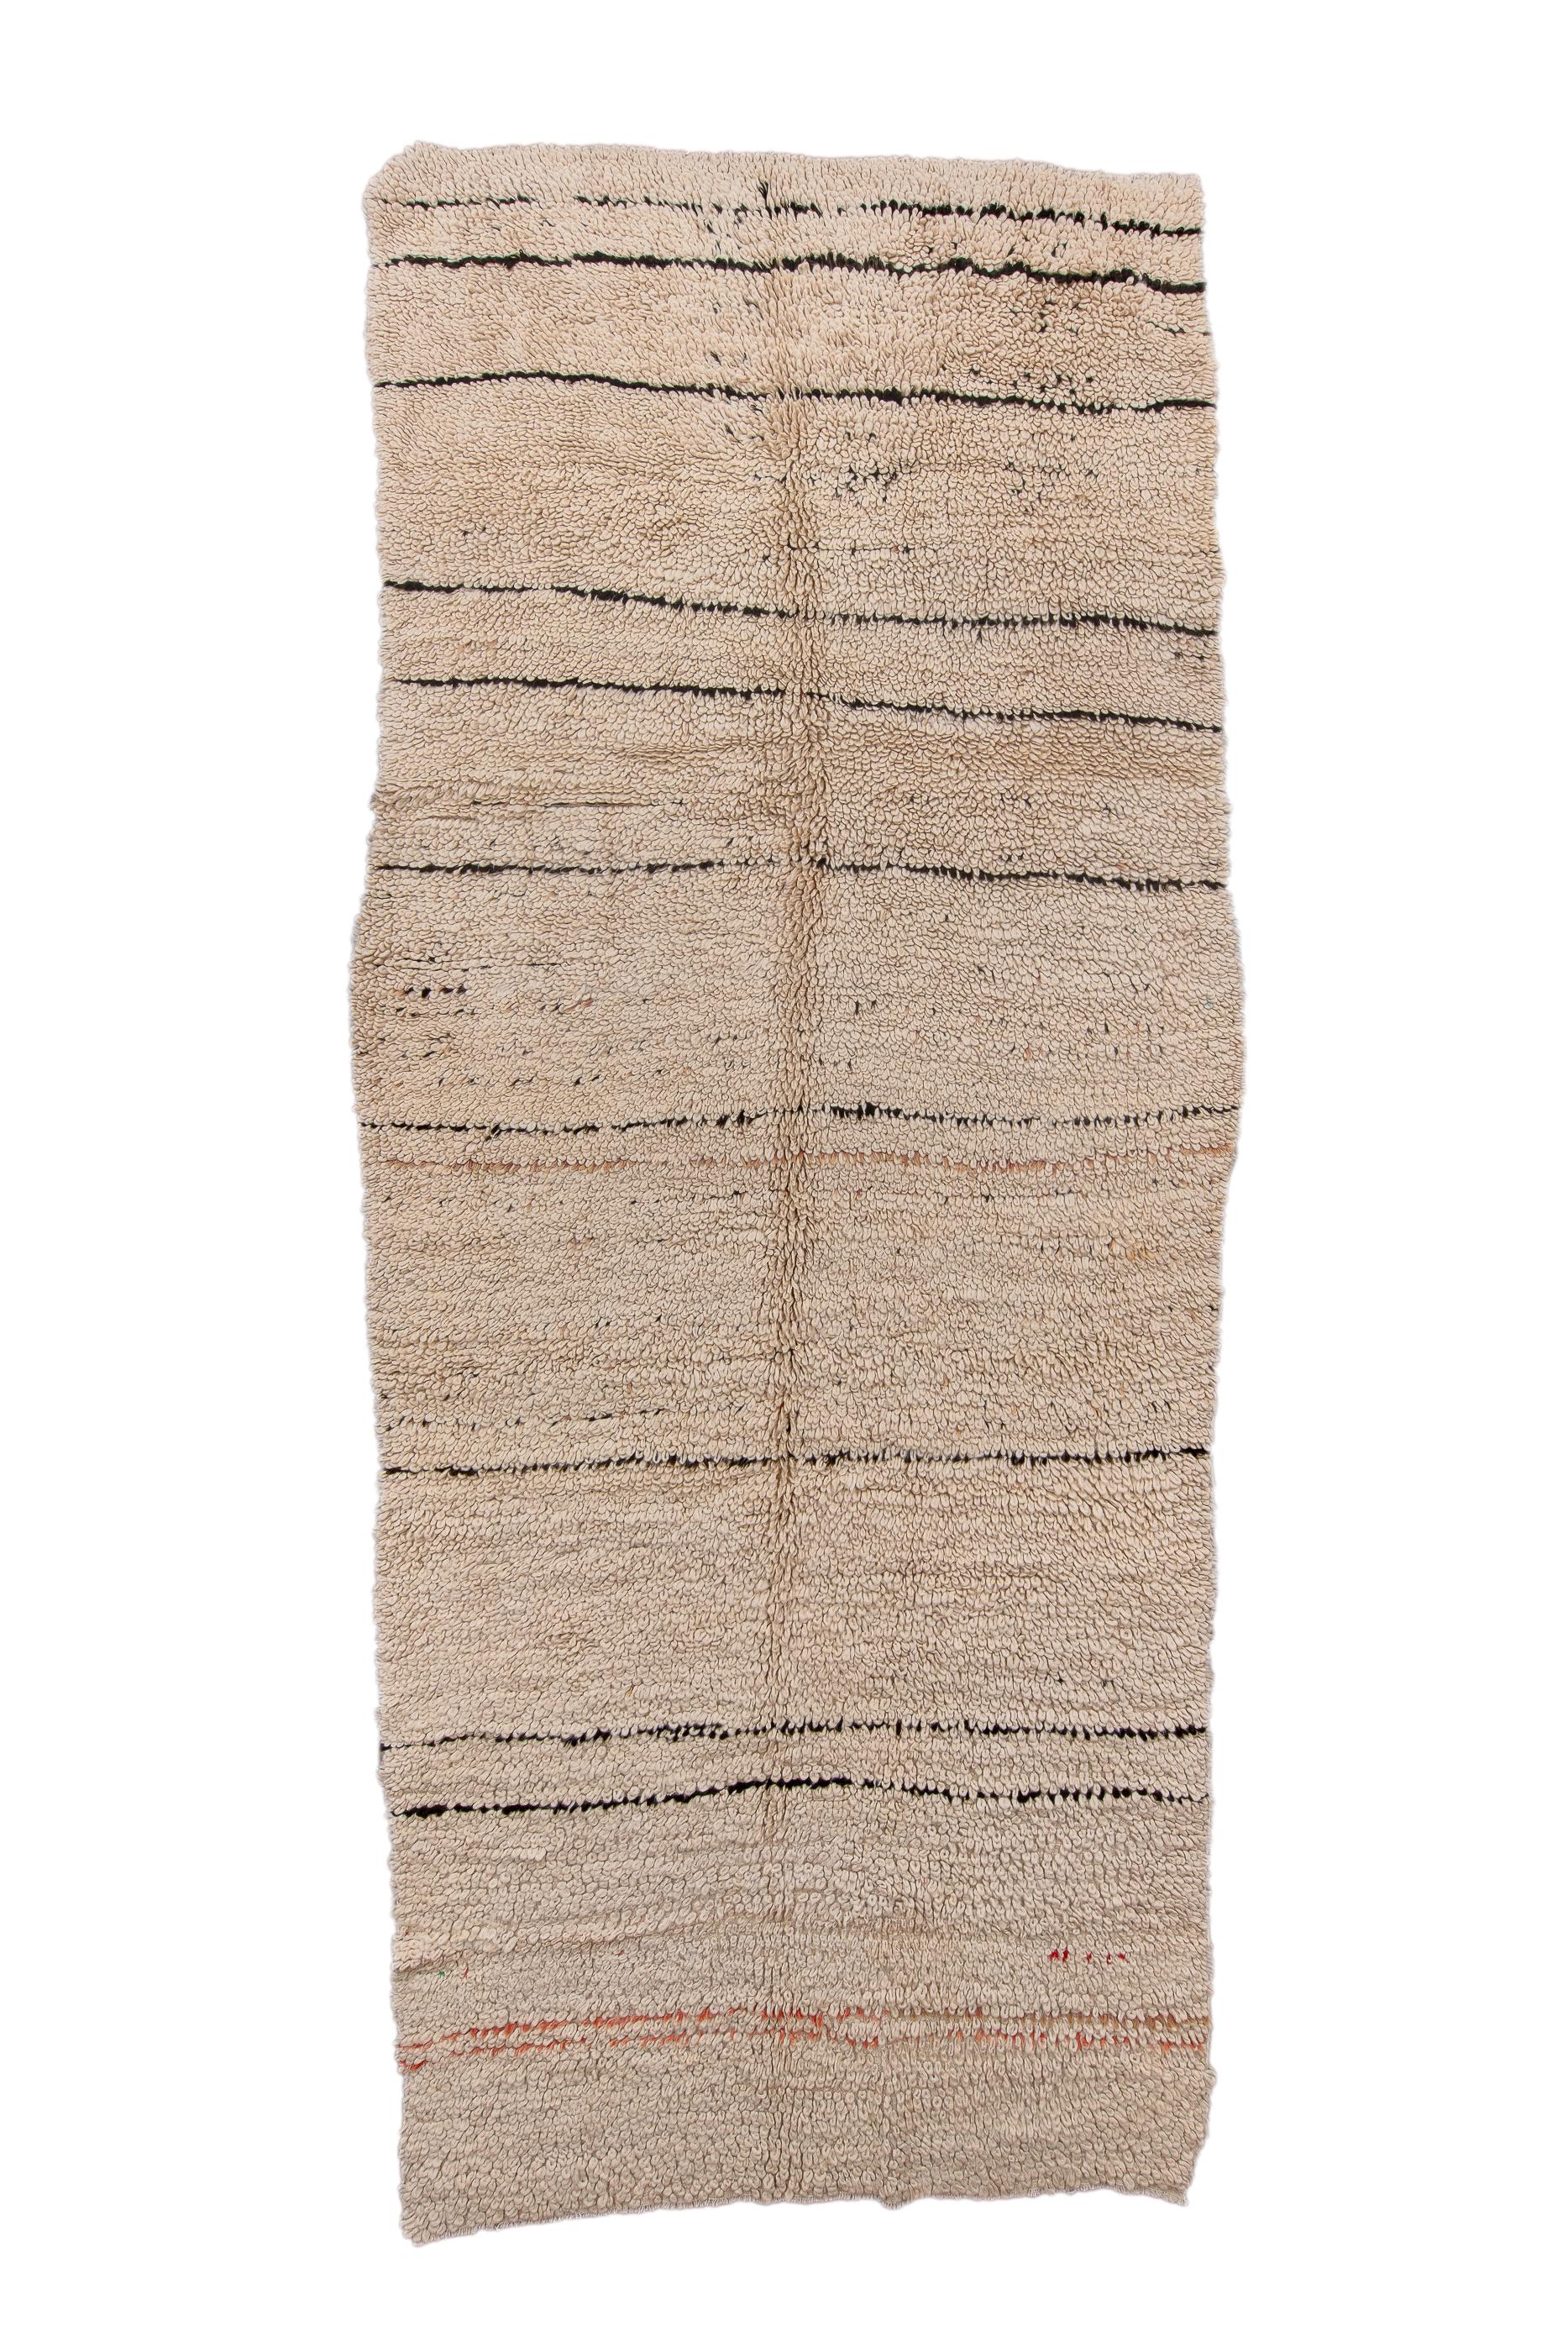 This roughly woven, coarse weave tribal kellegi (long carpet) shows broken, irregularly spaced and drawn brown lines and weak abrashes against the oatmeal ground, in a borderless context. The carpet bens, bows and wriggles to assert its